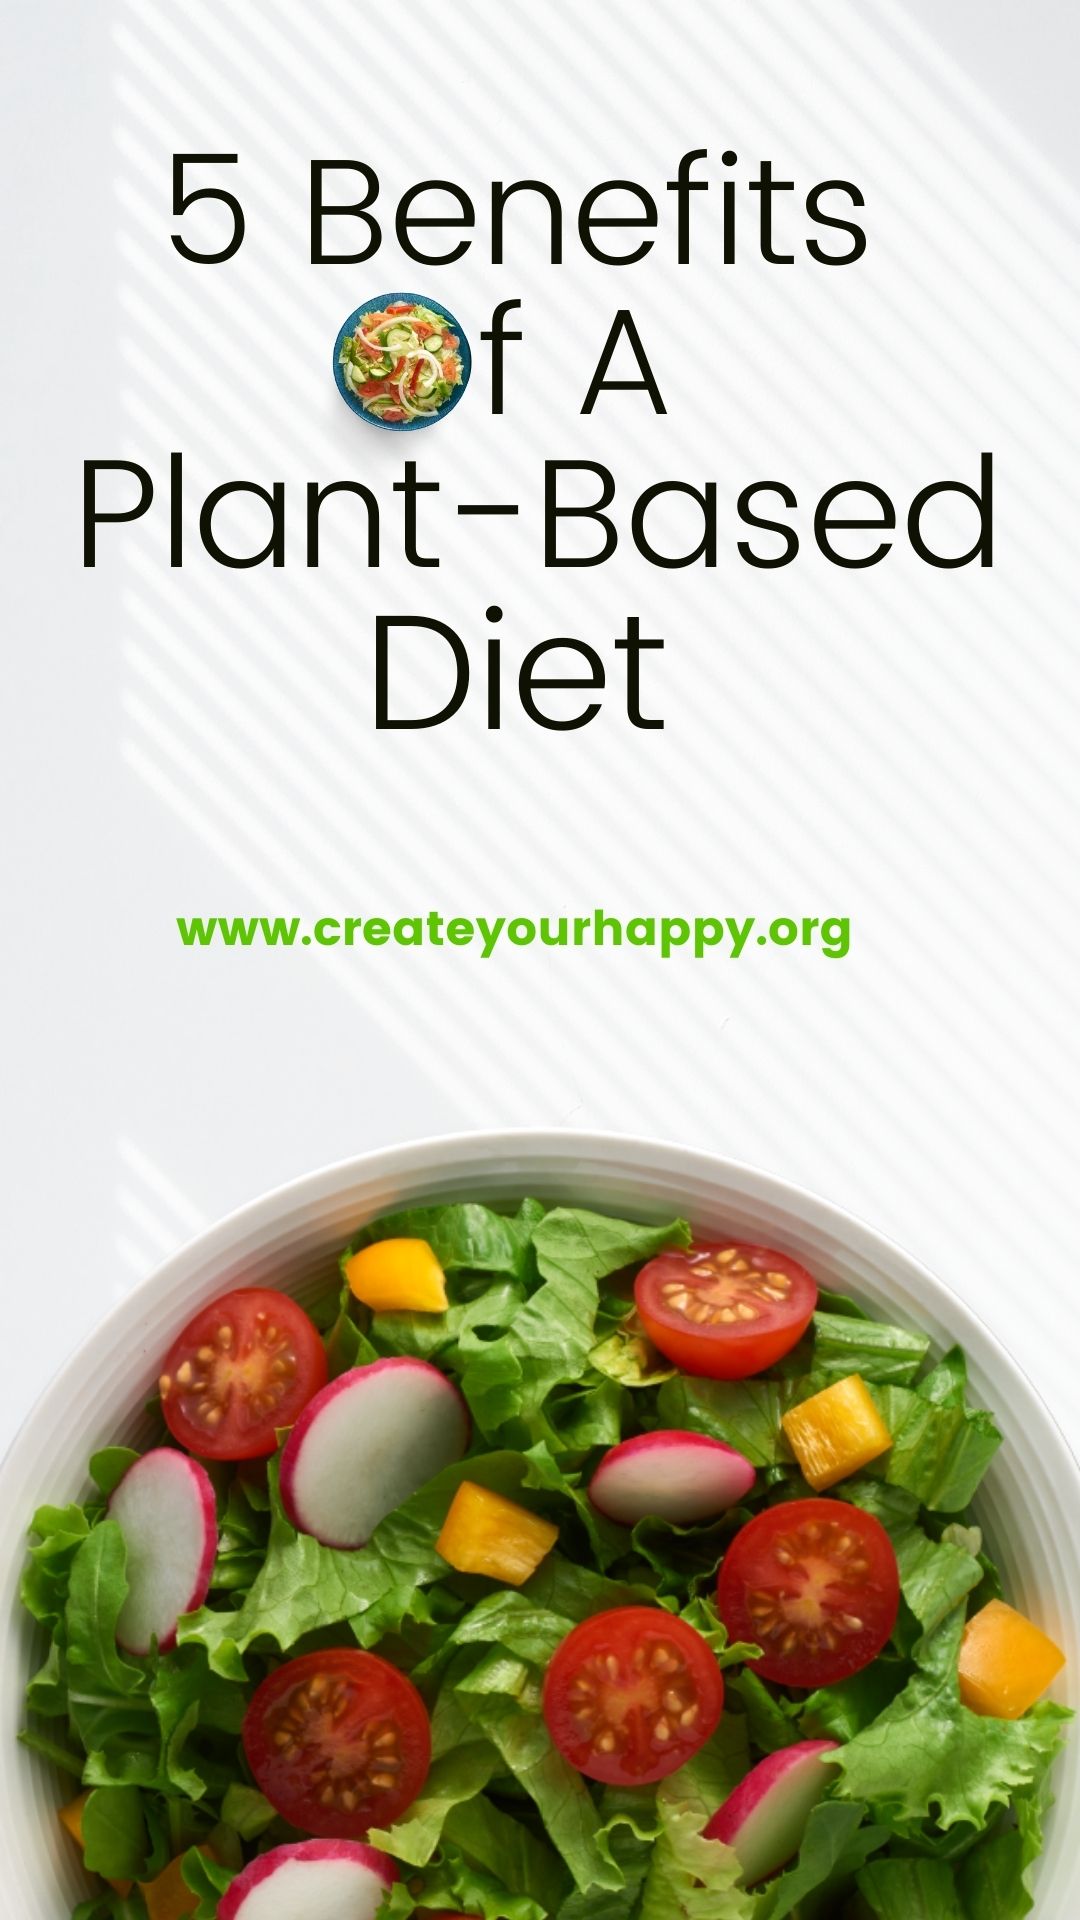 5 Benefits of a Plant-Based Diet